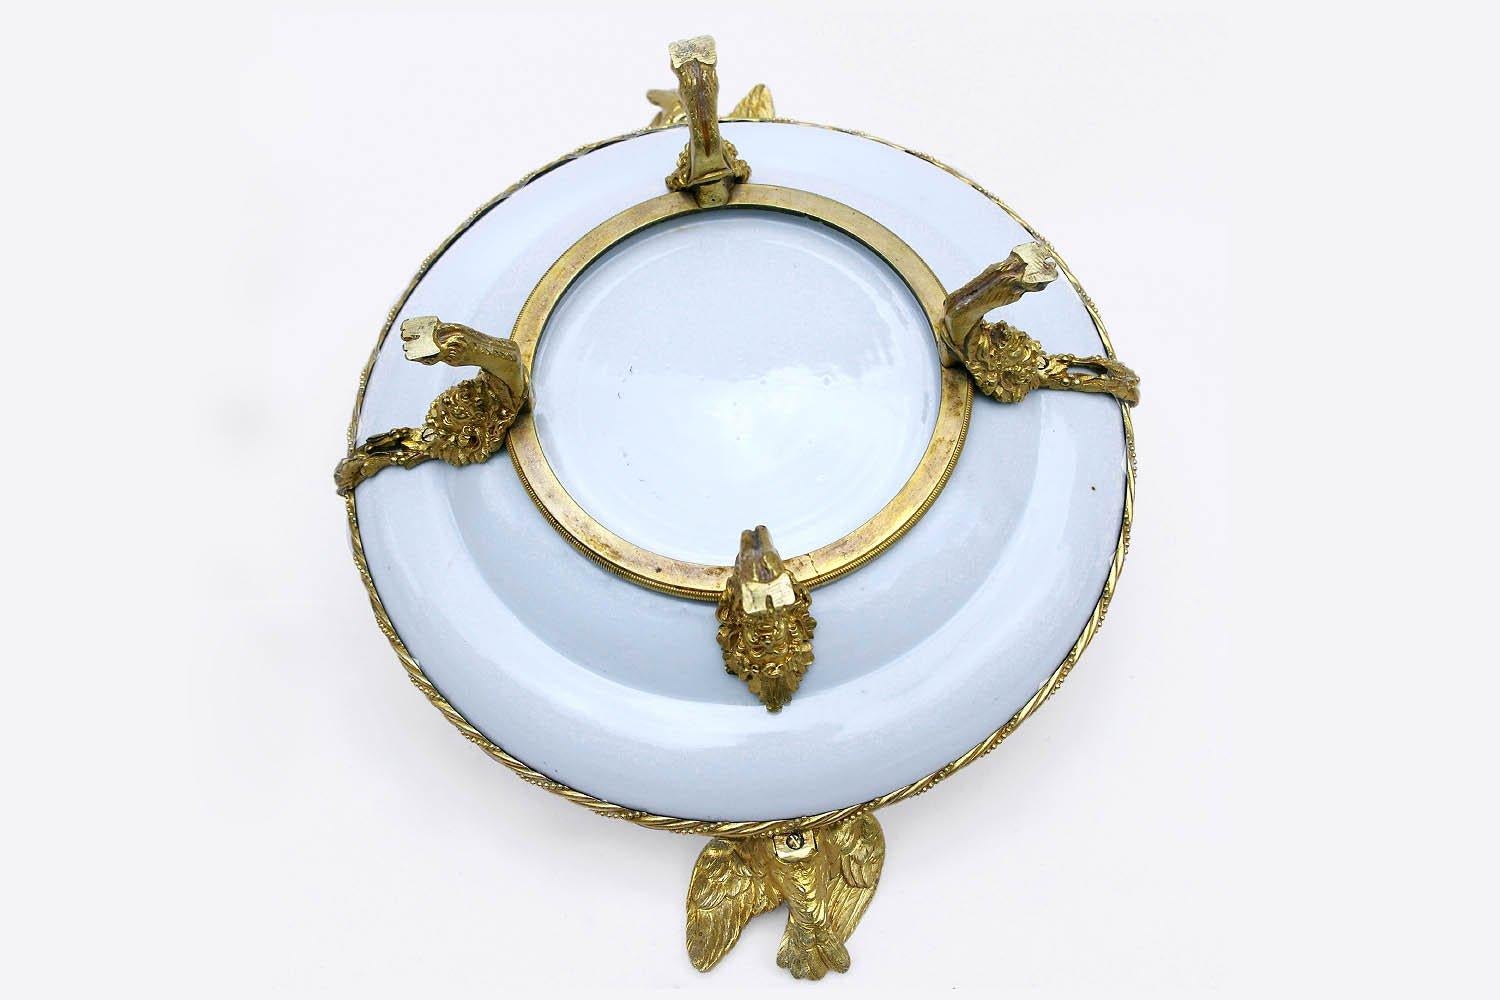 Canton porcelain plate mounted in chiseled and gilt bronze.
Central decor of an Asian scene representing two men and a woman around a table and a third man hidden behind a door. They are on a house deck, overlooking a garden. White marli framed by